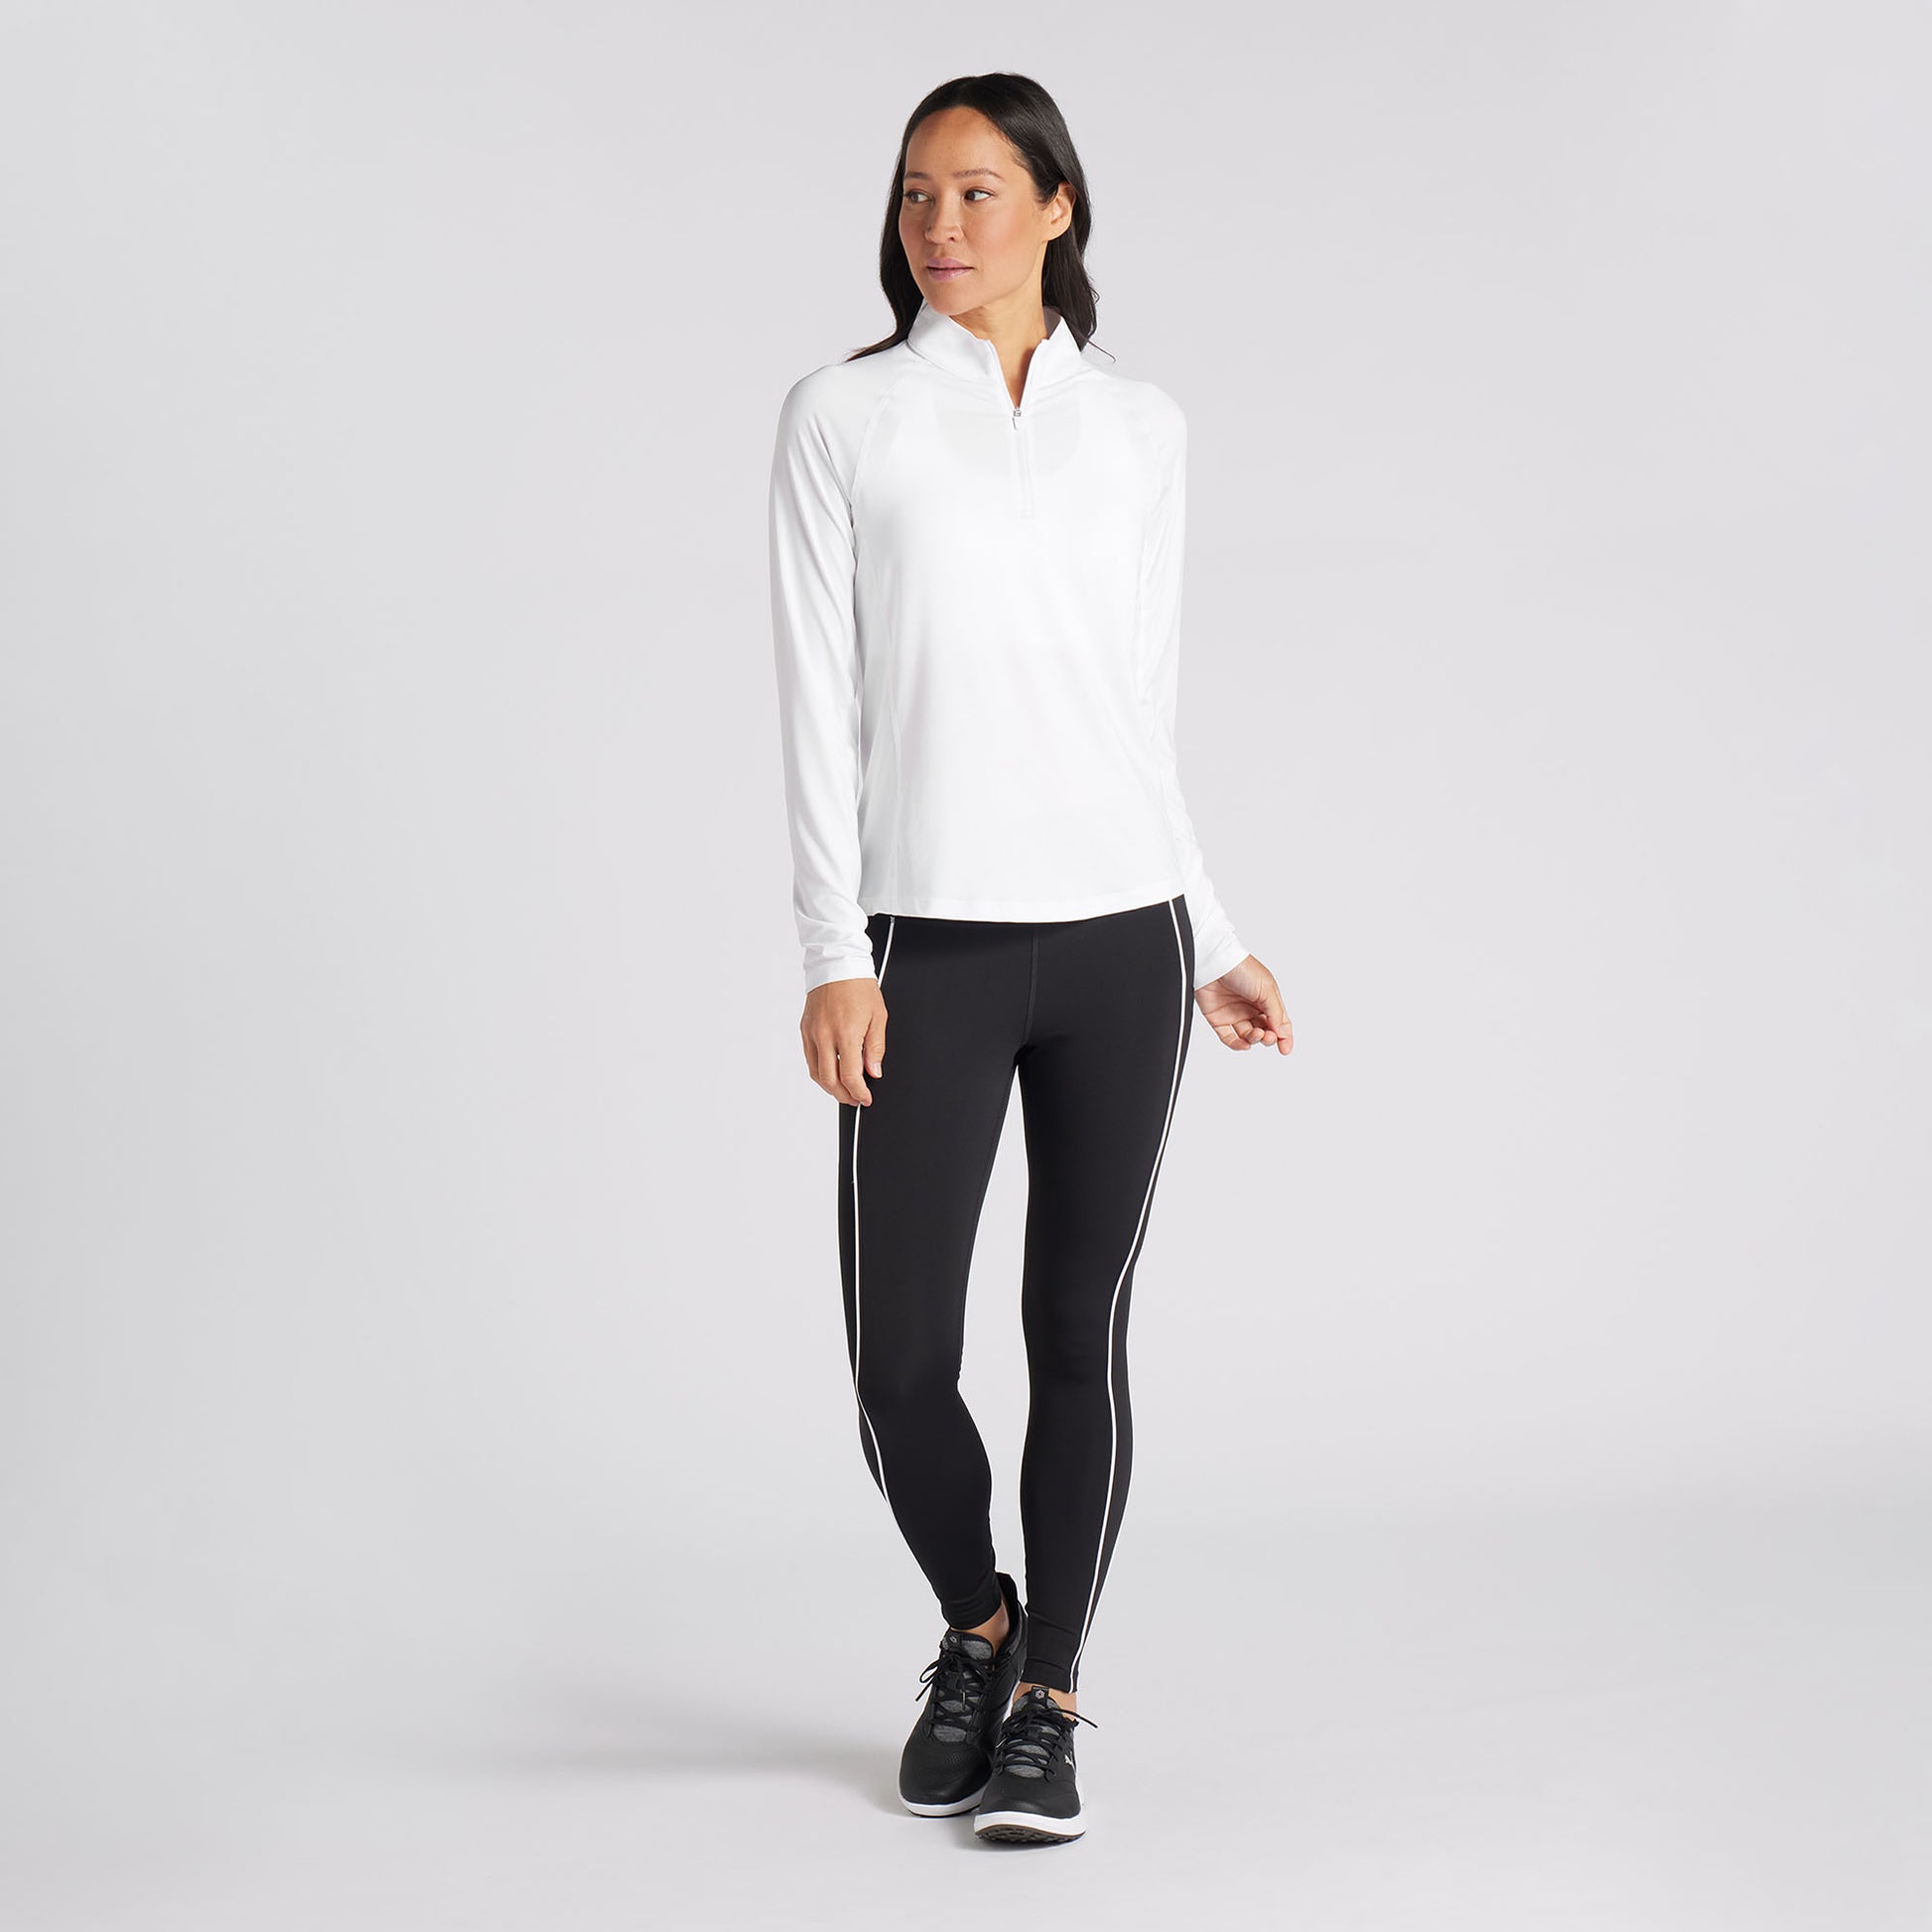 Puma Ladies You-V Leggings in Black with White Piping Detail